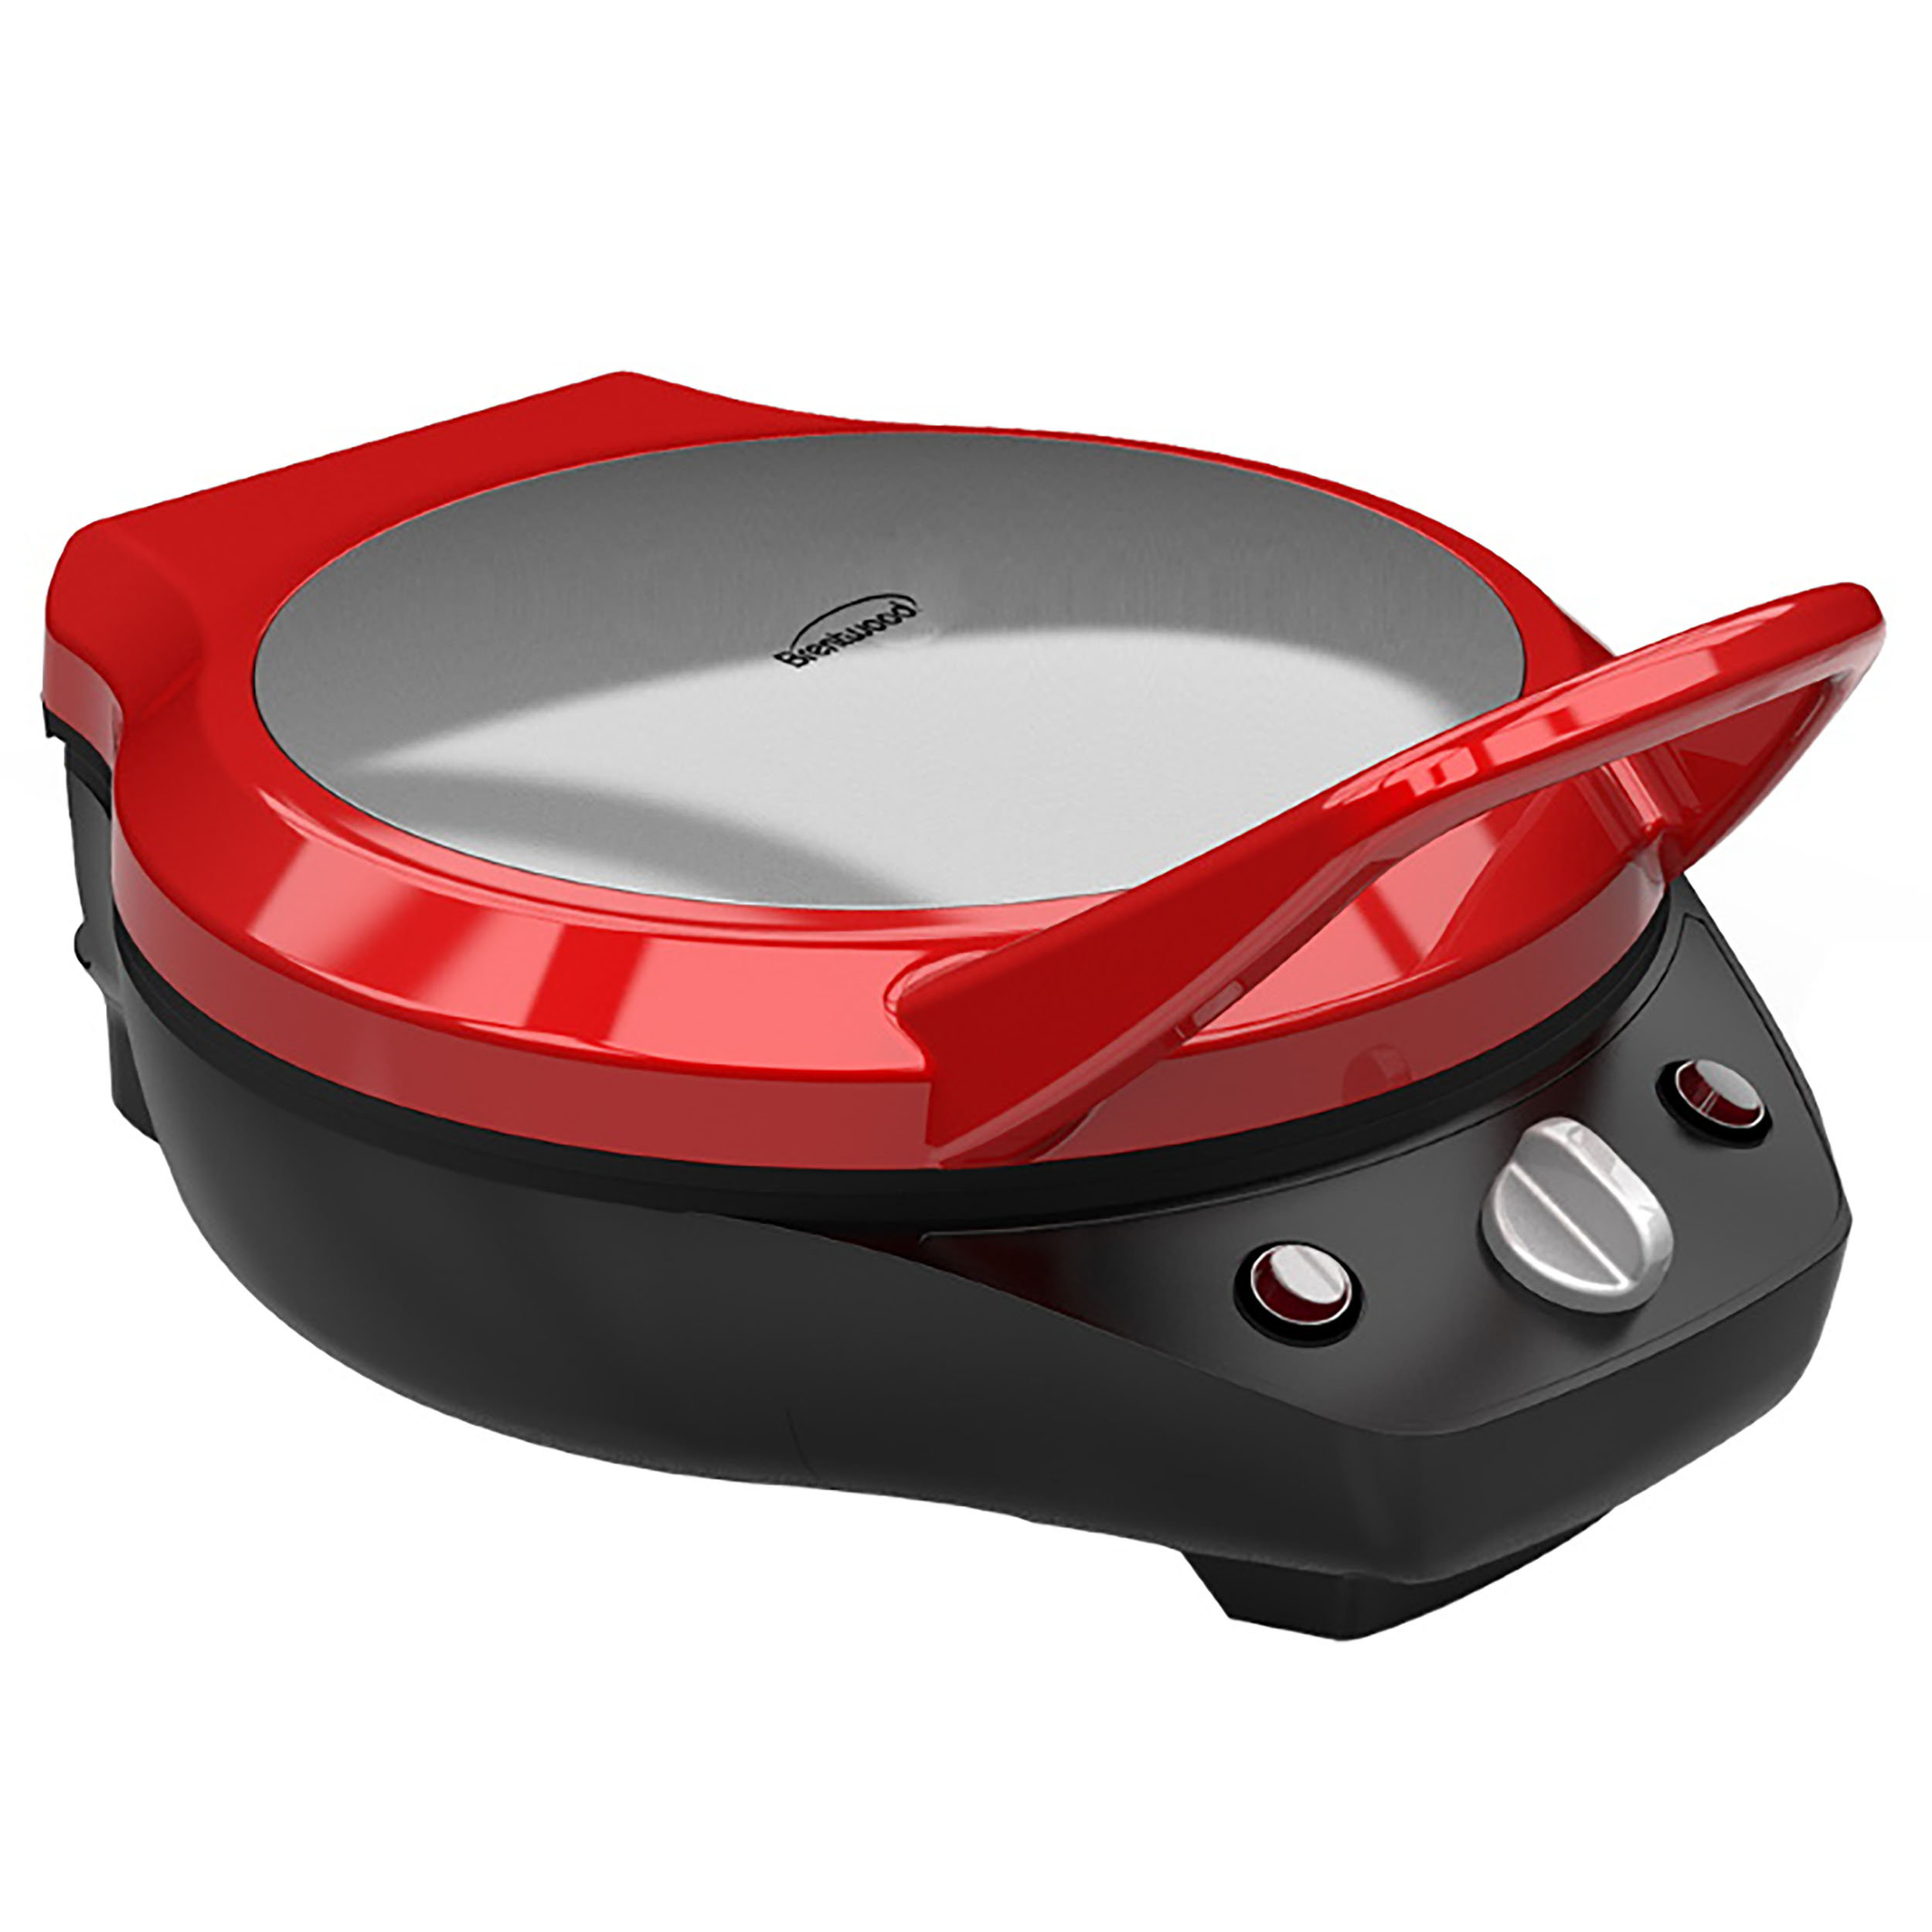 Brentwood - TS-120 Brentwood Quesadilla Maker, 8-inch, Red